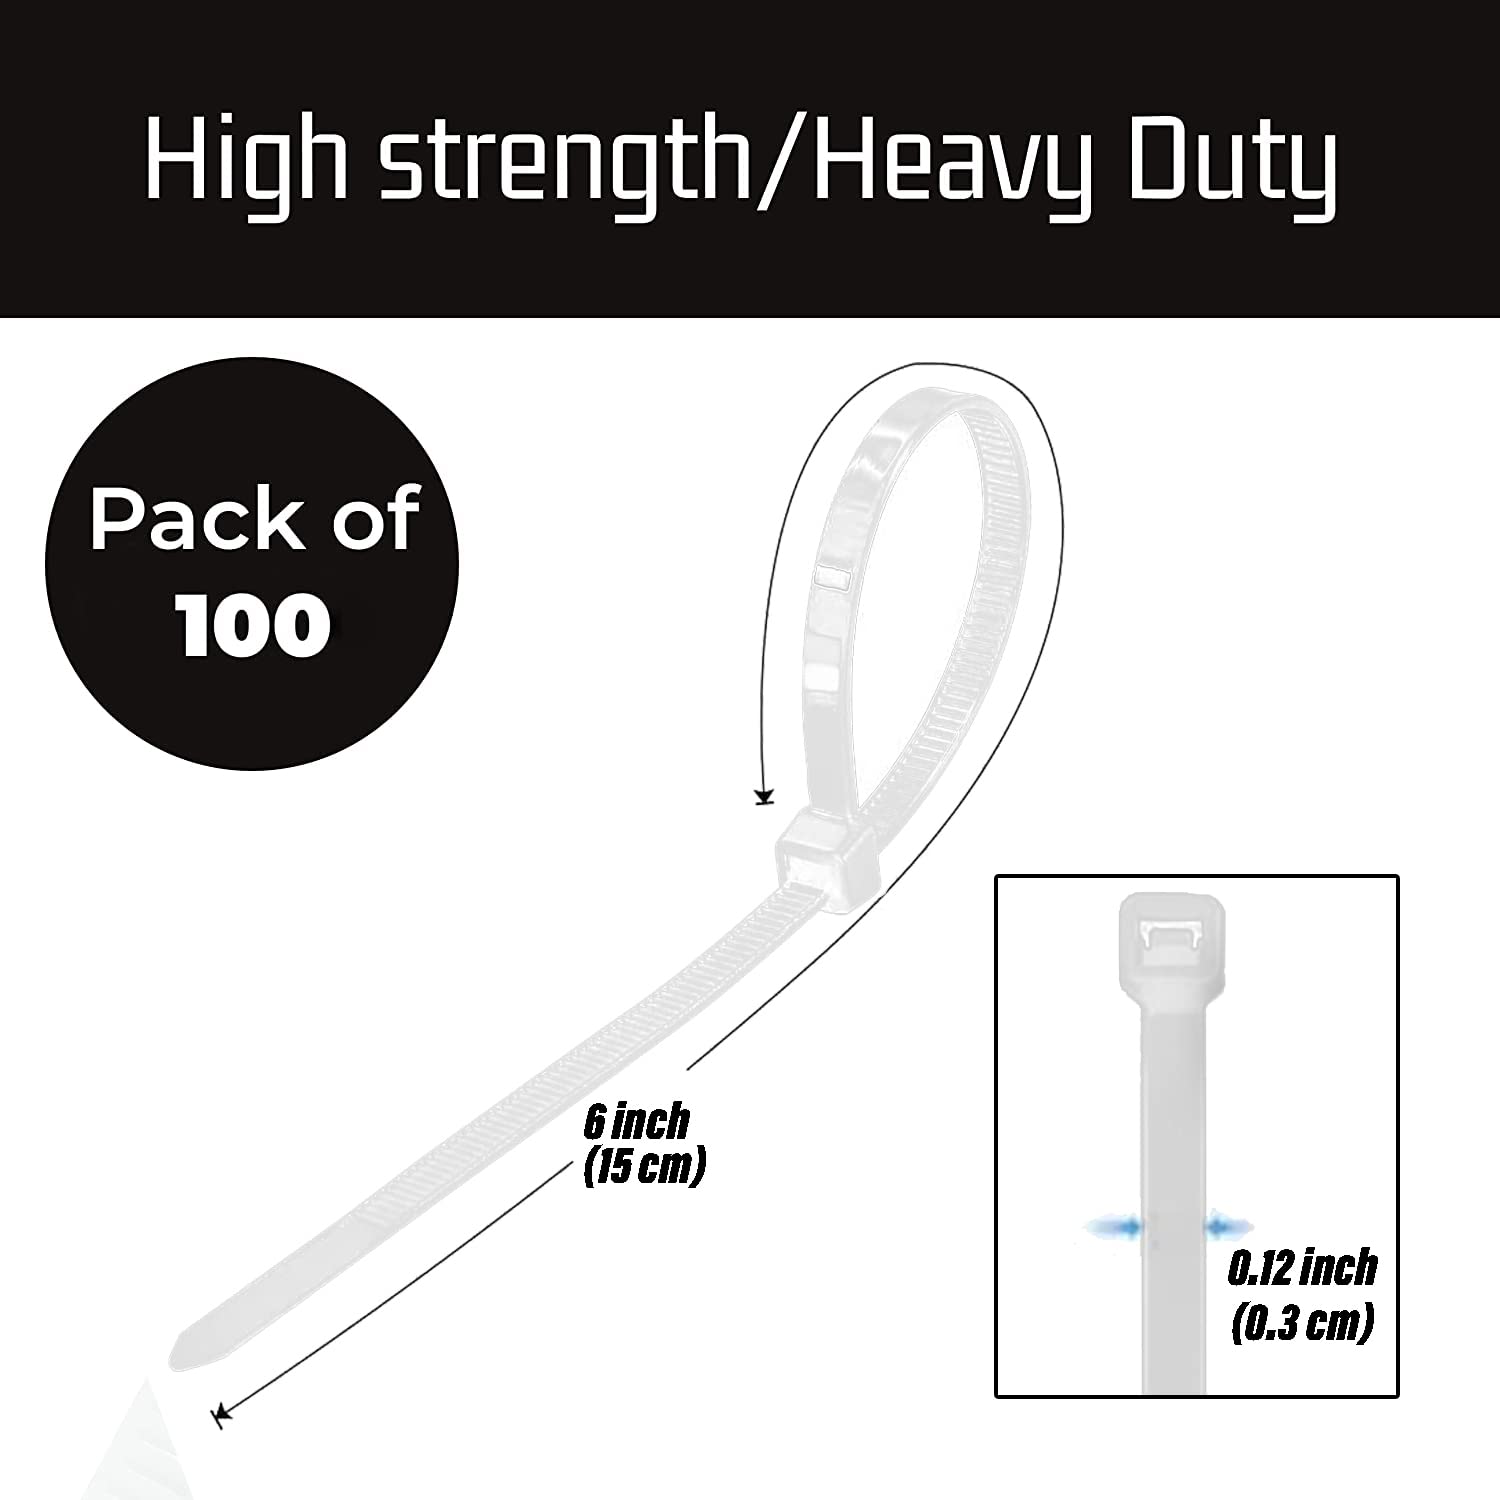 Kuber Industries 150 MM Self Locking Cable Ties|Heavy Duty Nylon Zip Ties|Wire With 49 Pounds Tensile Strength|PAck of 100 (White)